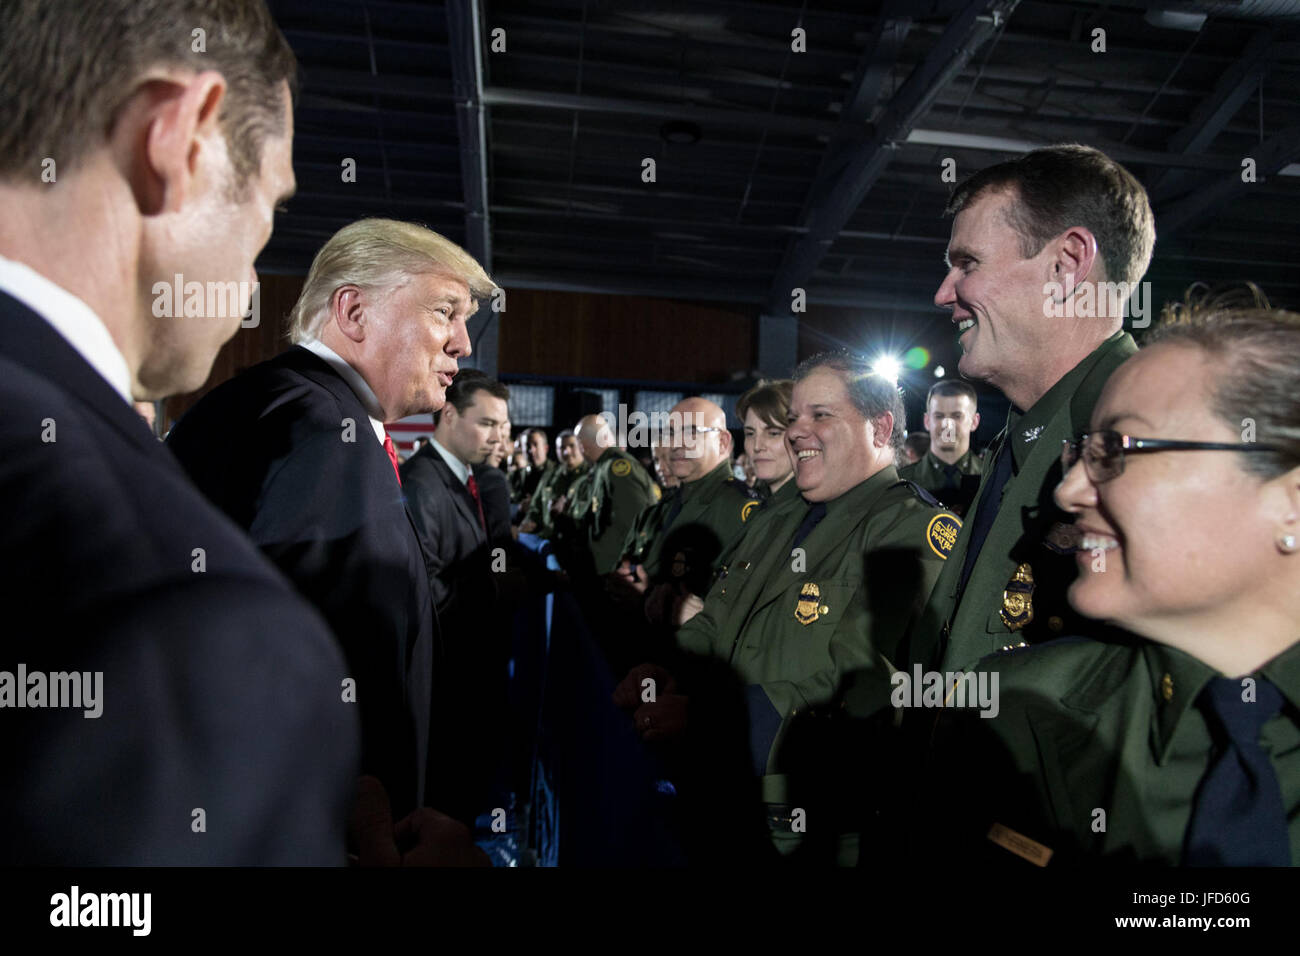 President Donald J. Trump greets audience members after delivering remarks at the Department of Homeland Security (DHS) in Washington, D.C., Wednesday, January 25, 2017. (Official White House Photo by Shealah Craighead) Stock Photo